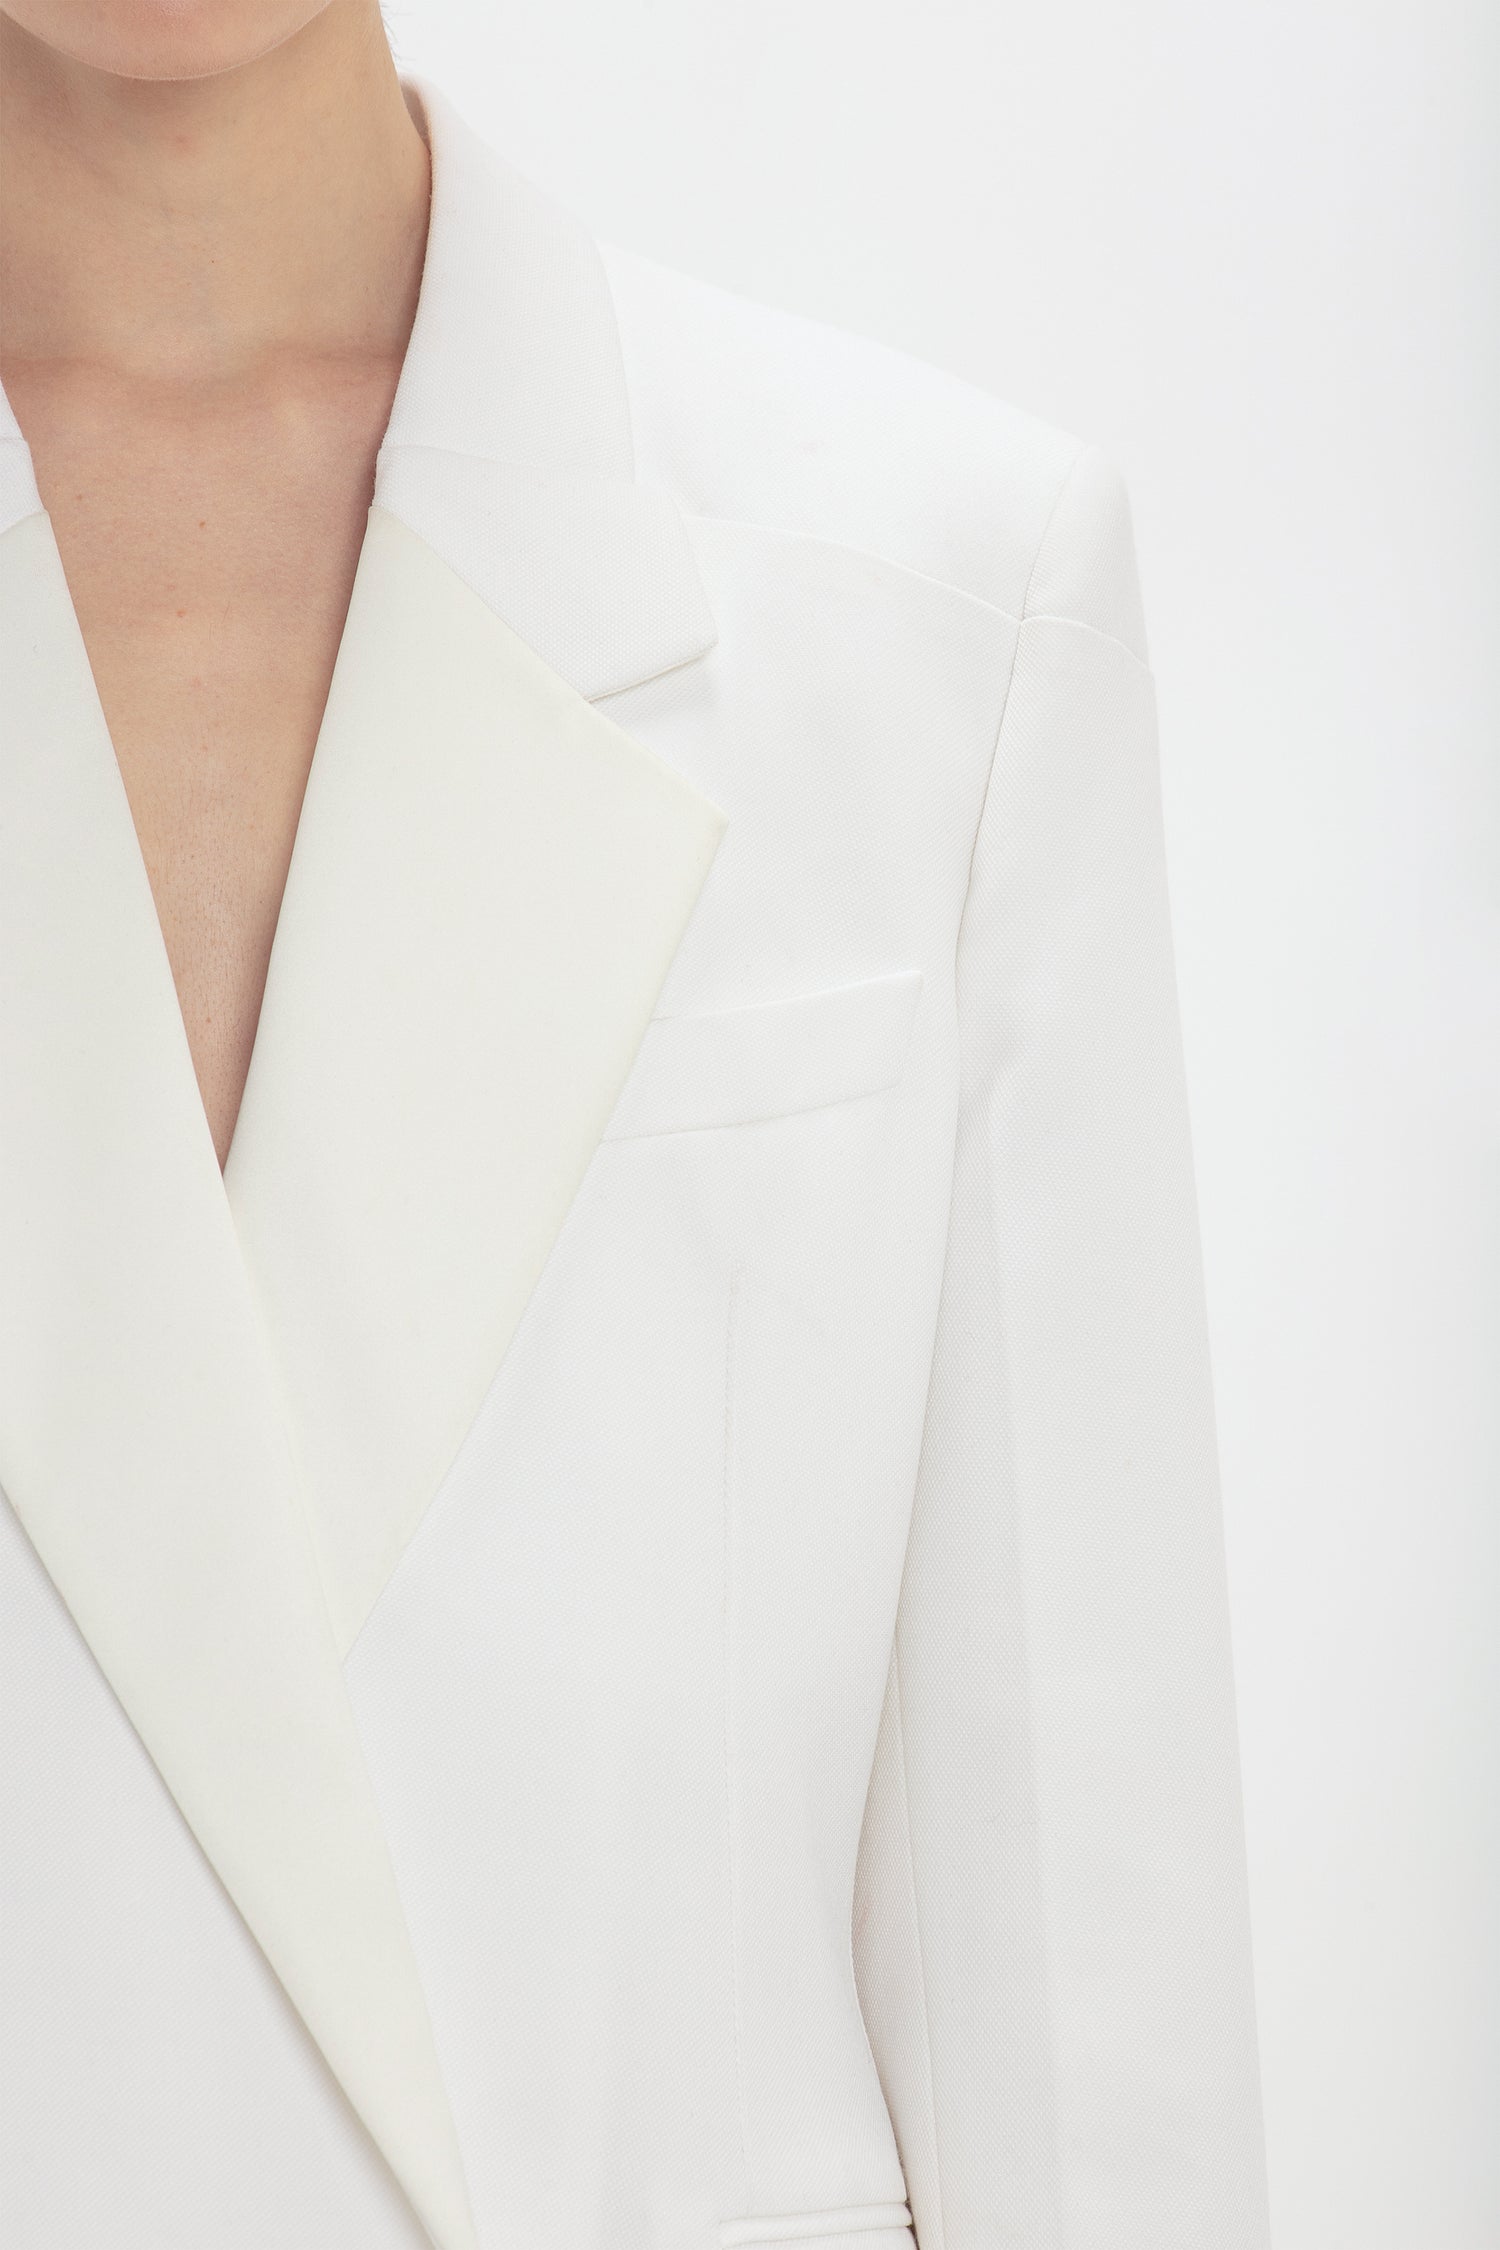 Close-up of a person wearing a white, Victoria Beckham double-breasted cut blazer with a notched lapel, focusing on the details of the collar and chest area.